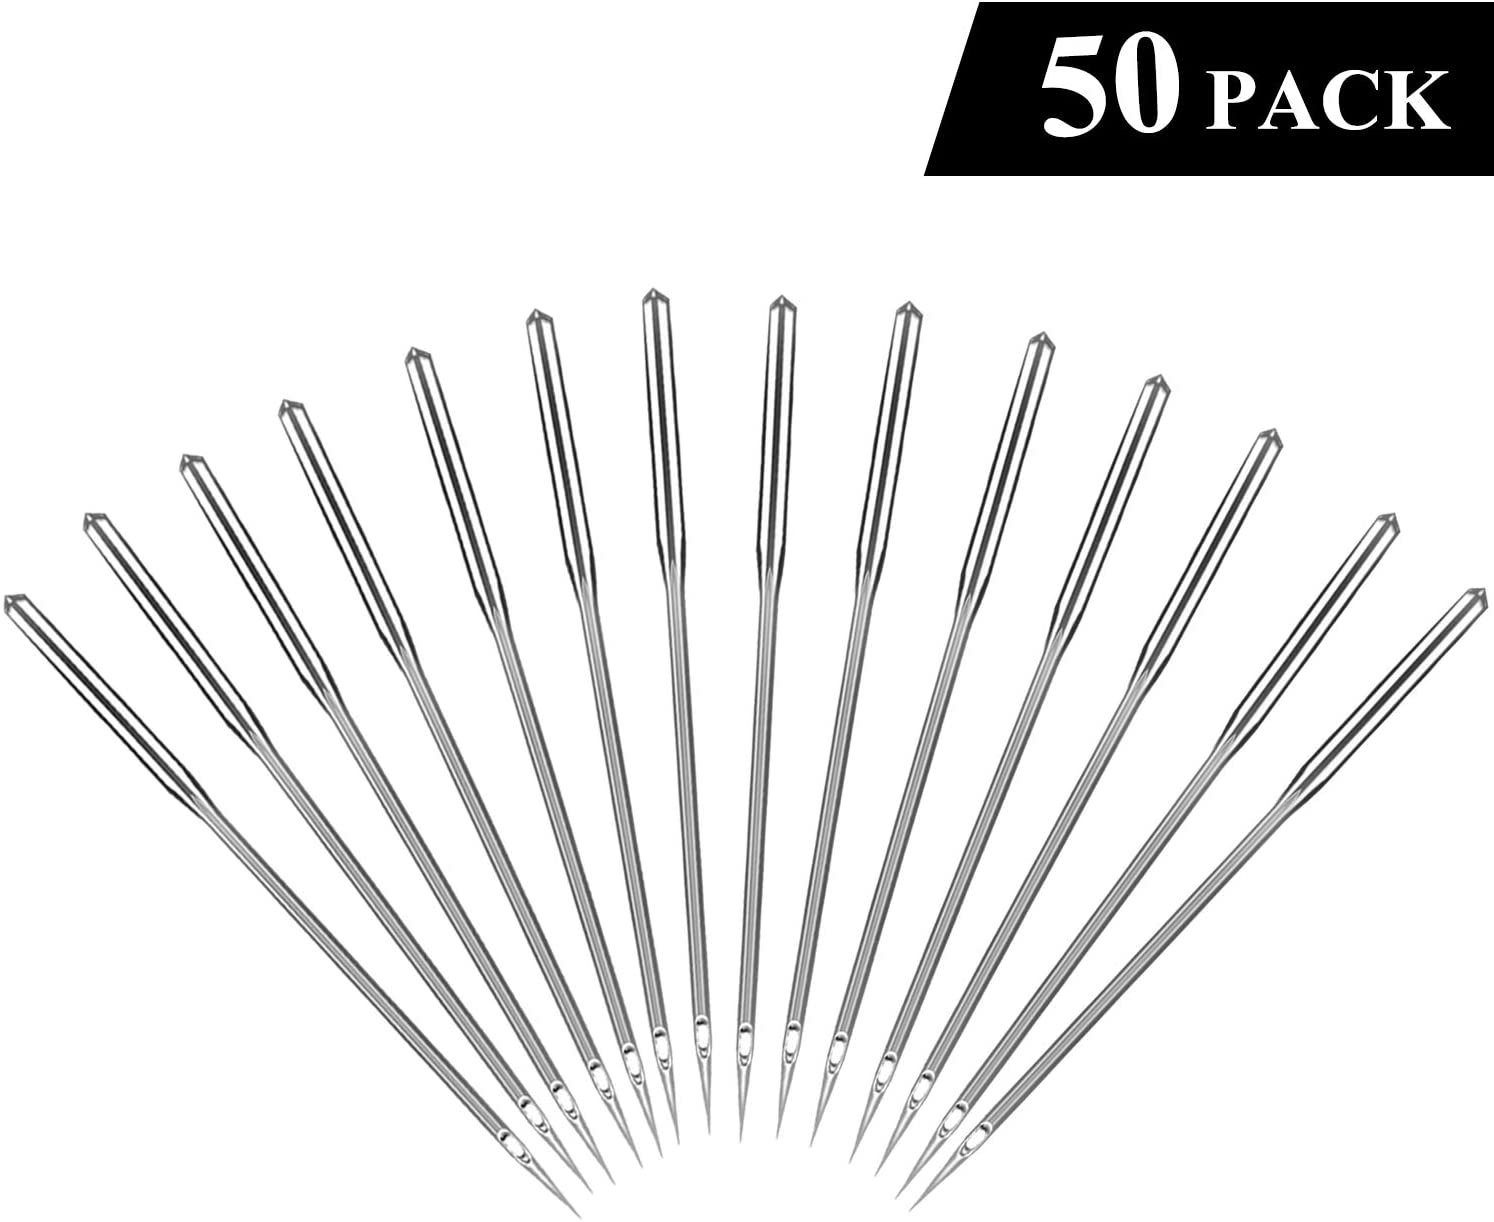 50pcs Sewing Machine Needles, Universal Sewing Needles for Singer, Brother, Bernina, Kenmore, Janome, Schmetz, Easy Thread, Sizes 65/9, 75/11, 80/12